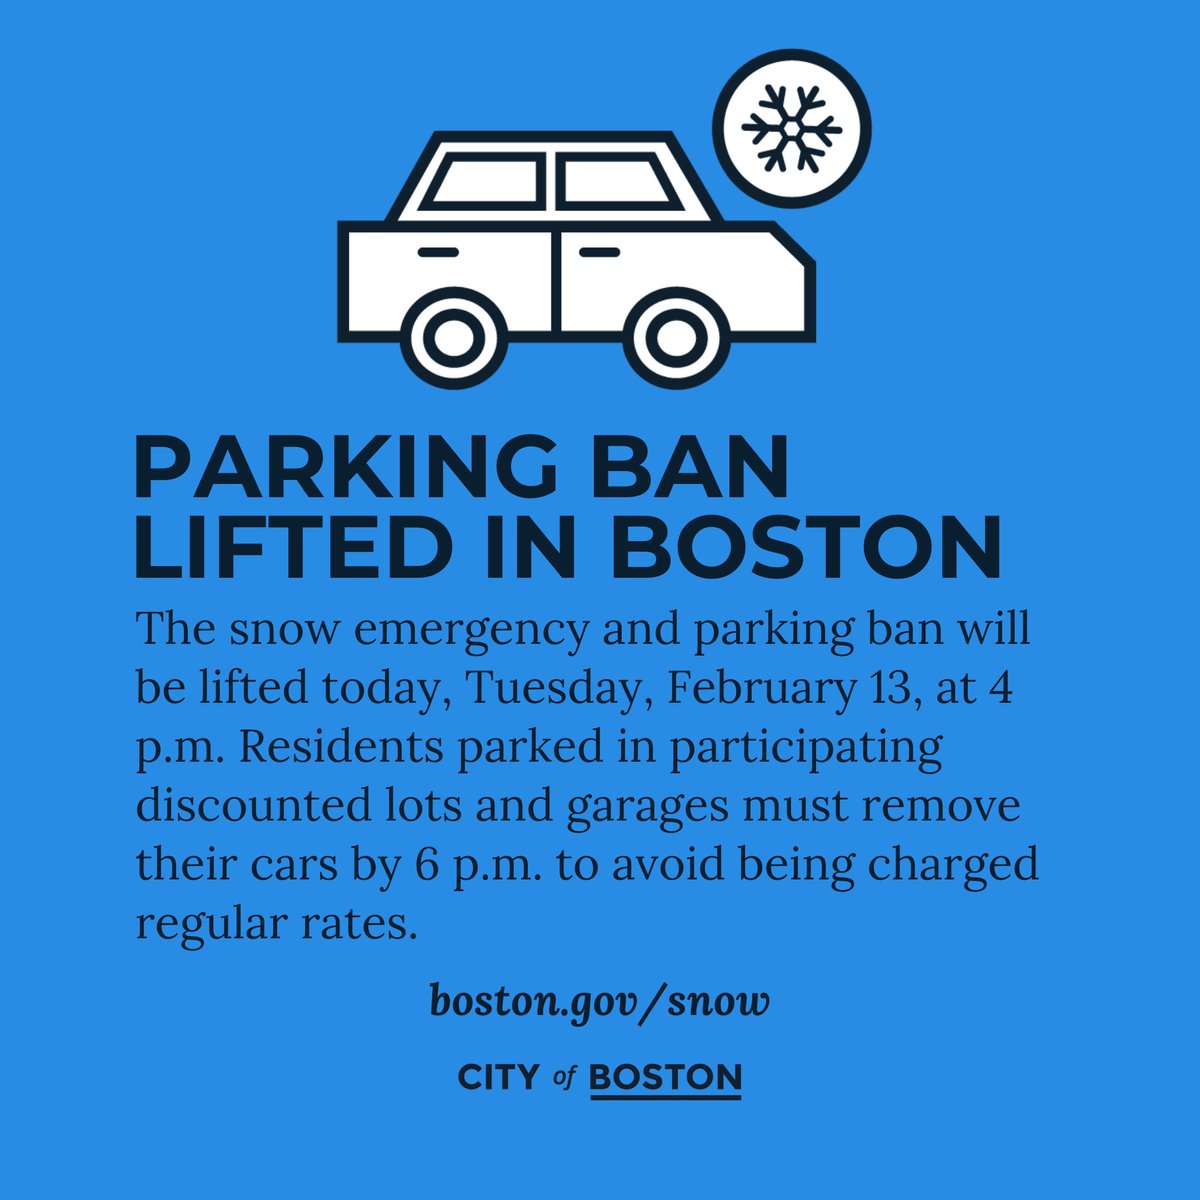 The snow emergency and parking ban will be lifted today, Tuesday, February 13, at 4 p.m. Residents parked in participating discounted lots and garages must remove their cars by 6 p.m. to avoid being charged regular rates. boston.gov/news/snow-emer…